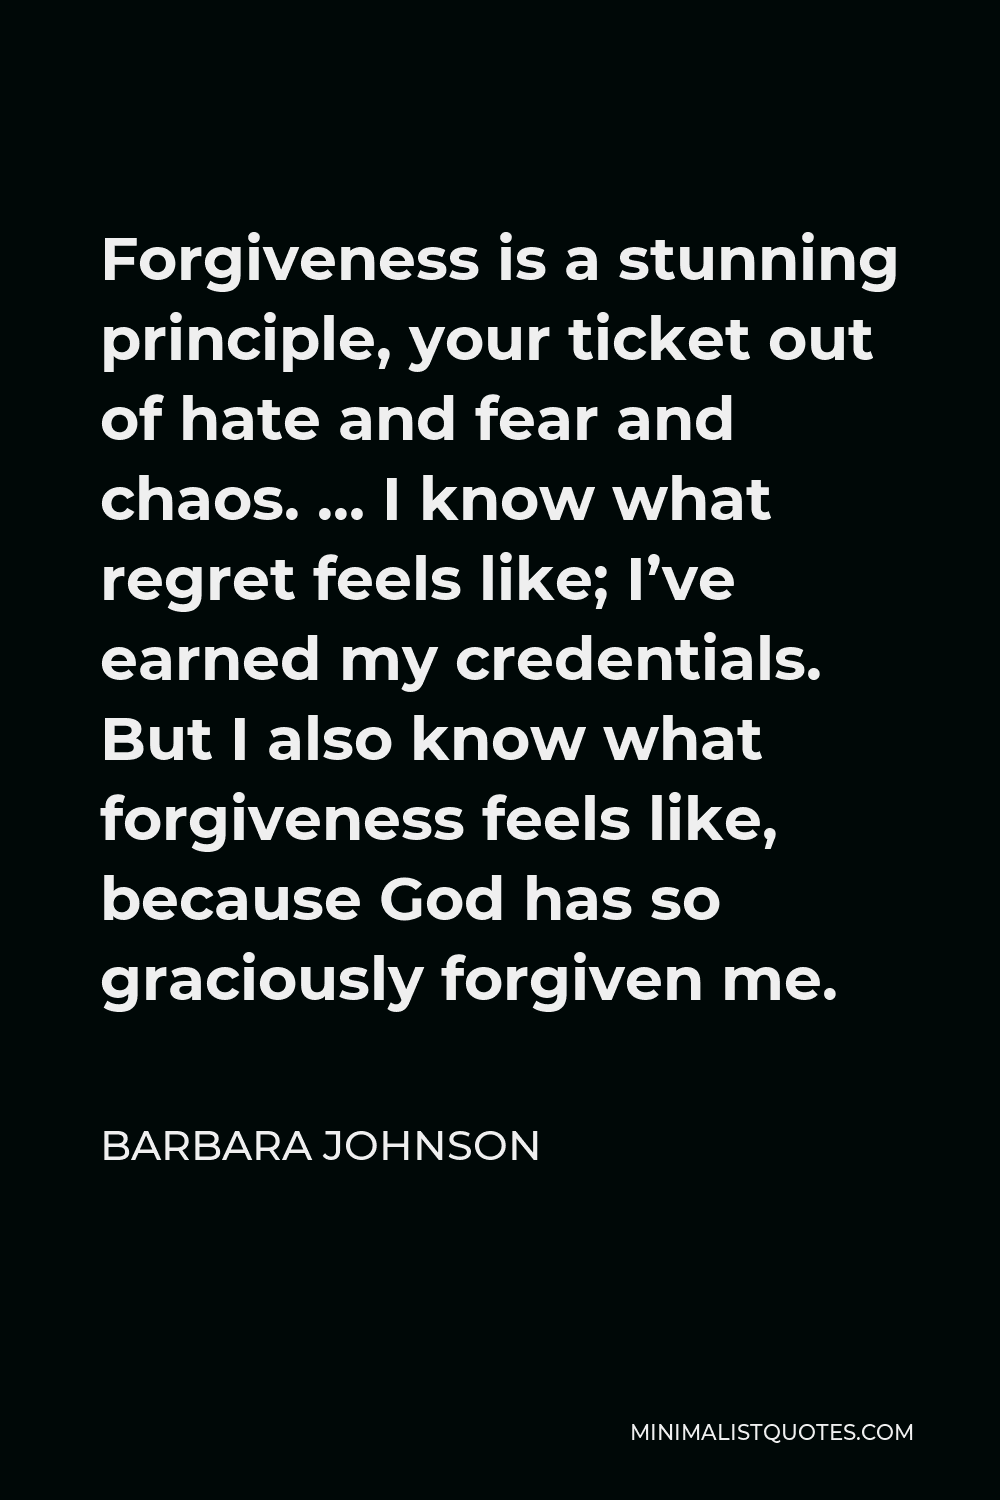 Barbara Johnson Quote - Forgiveness is a stunning principle, your ticket out of hate and fear and chaos. … I know what regret feels like; I’ve earned my credentials. But I also know what forgiveness feels like, because God has so graciously forgiven me.